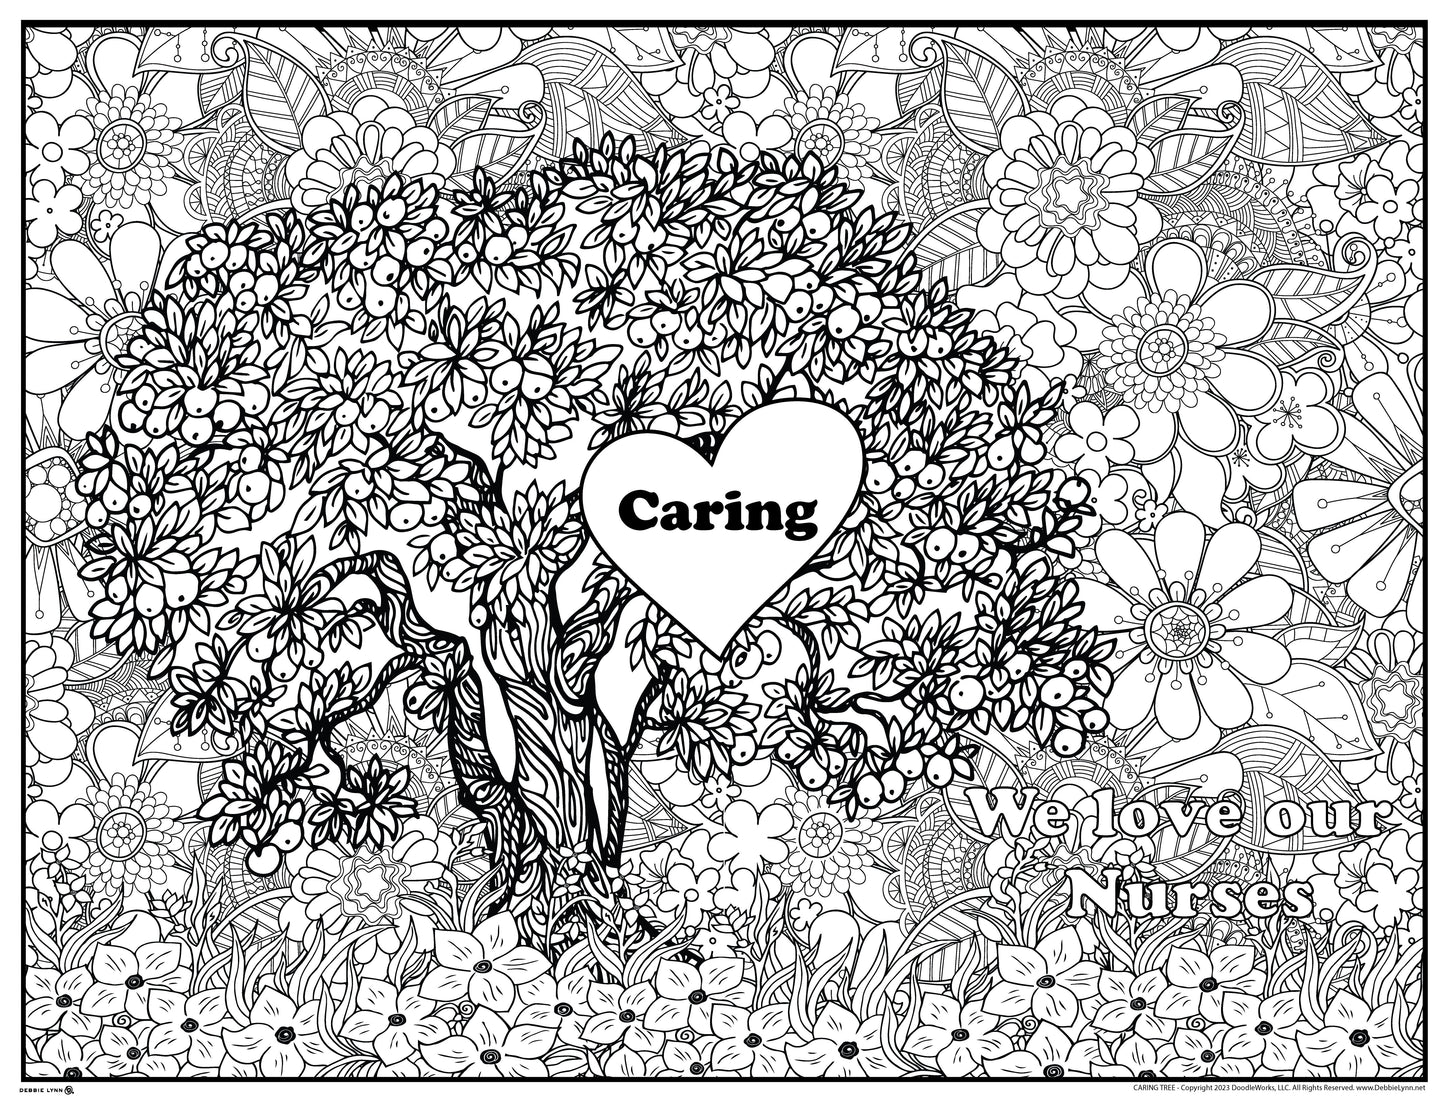 Caring Tree Personalized Giant Coloring Poster 46" x 60"